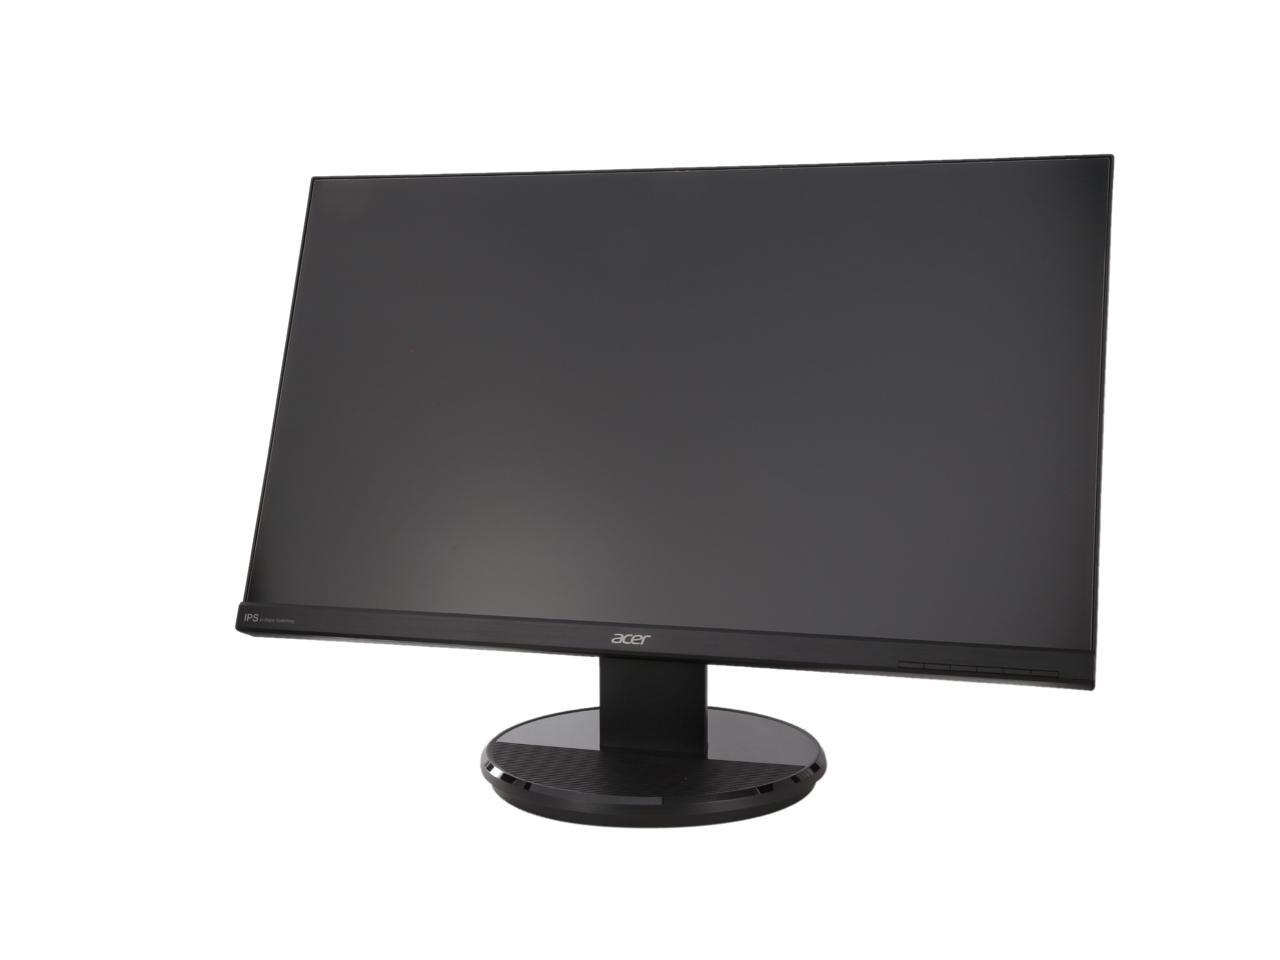 GTG Acer Certified K2 Series K272HUL 27" 4ms Widescreen LCD/LED Monitor IPS Ba 